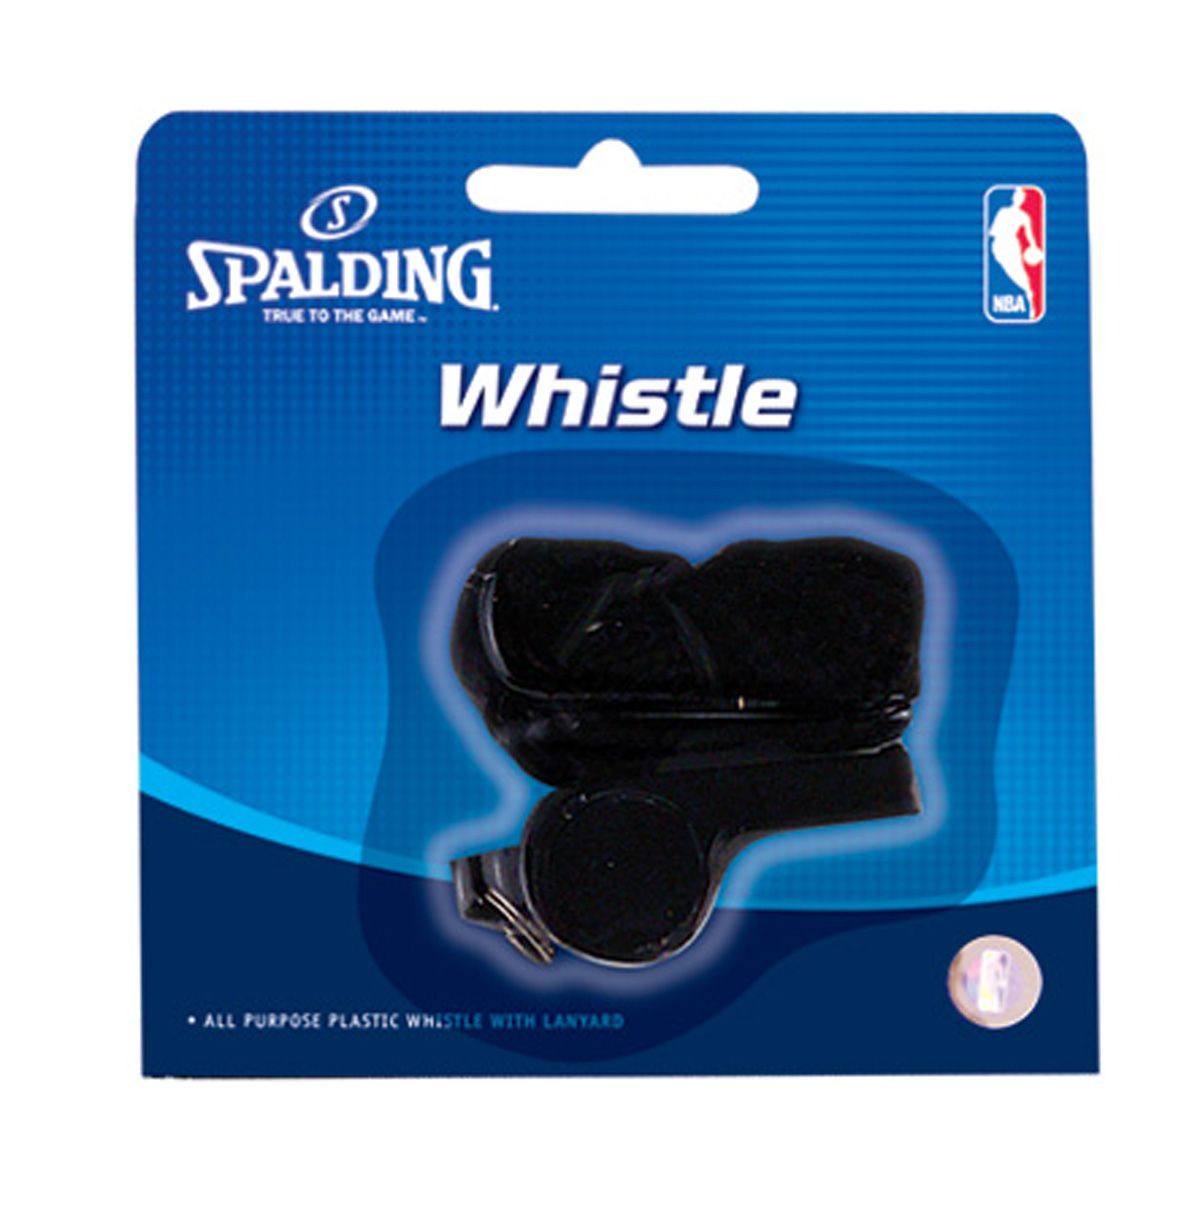 Spalding Plastic Black Whistle with Lanyard